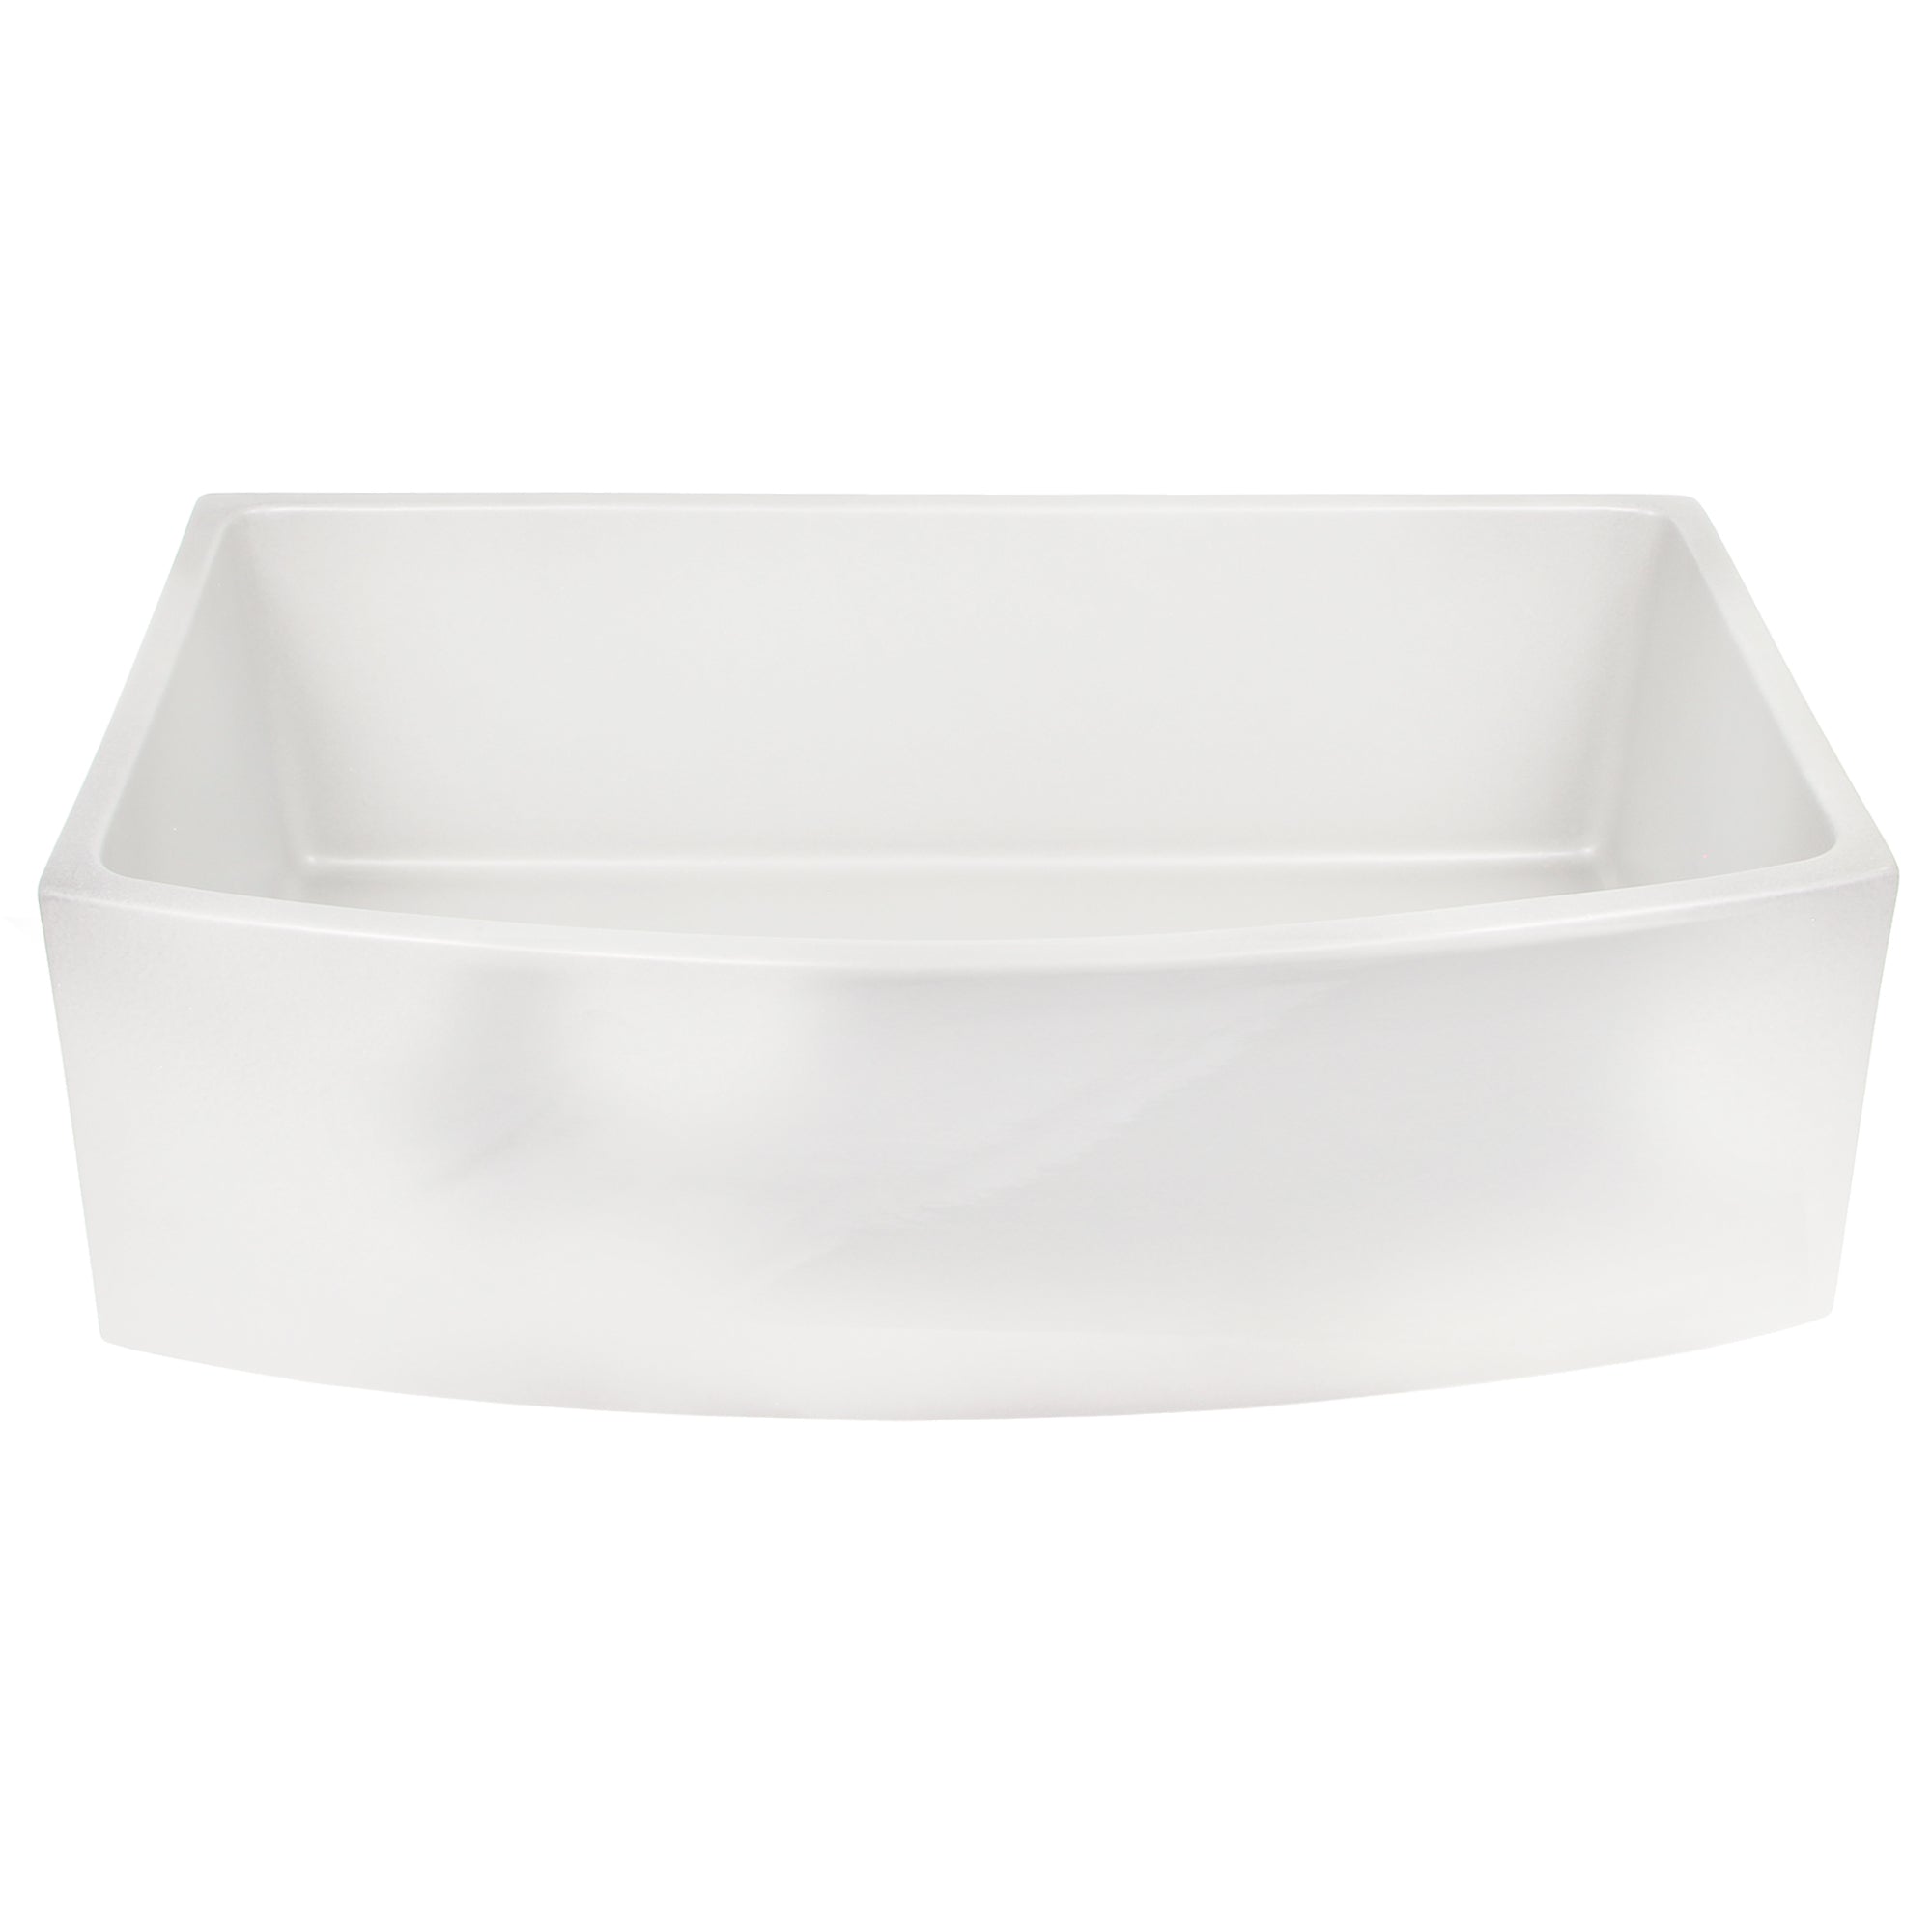 Nantucket Sinks 33 Inch White Farmhouse Fireclay Sink with Curved Apron